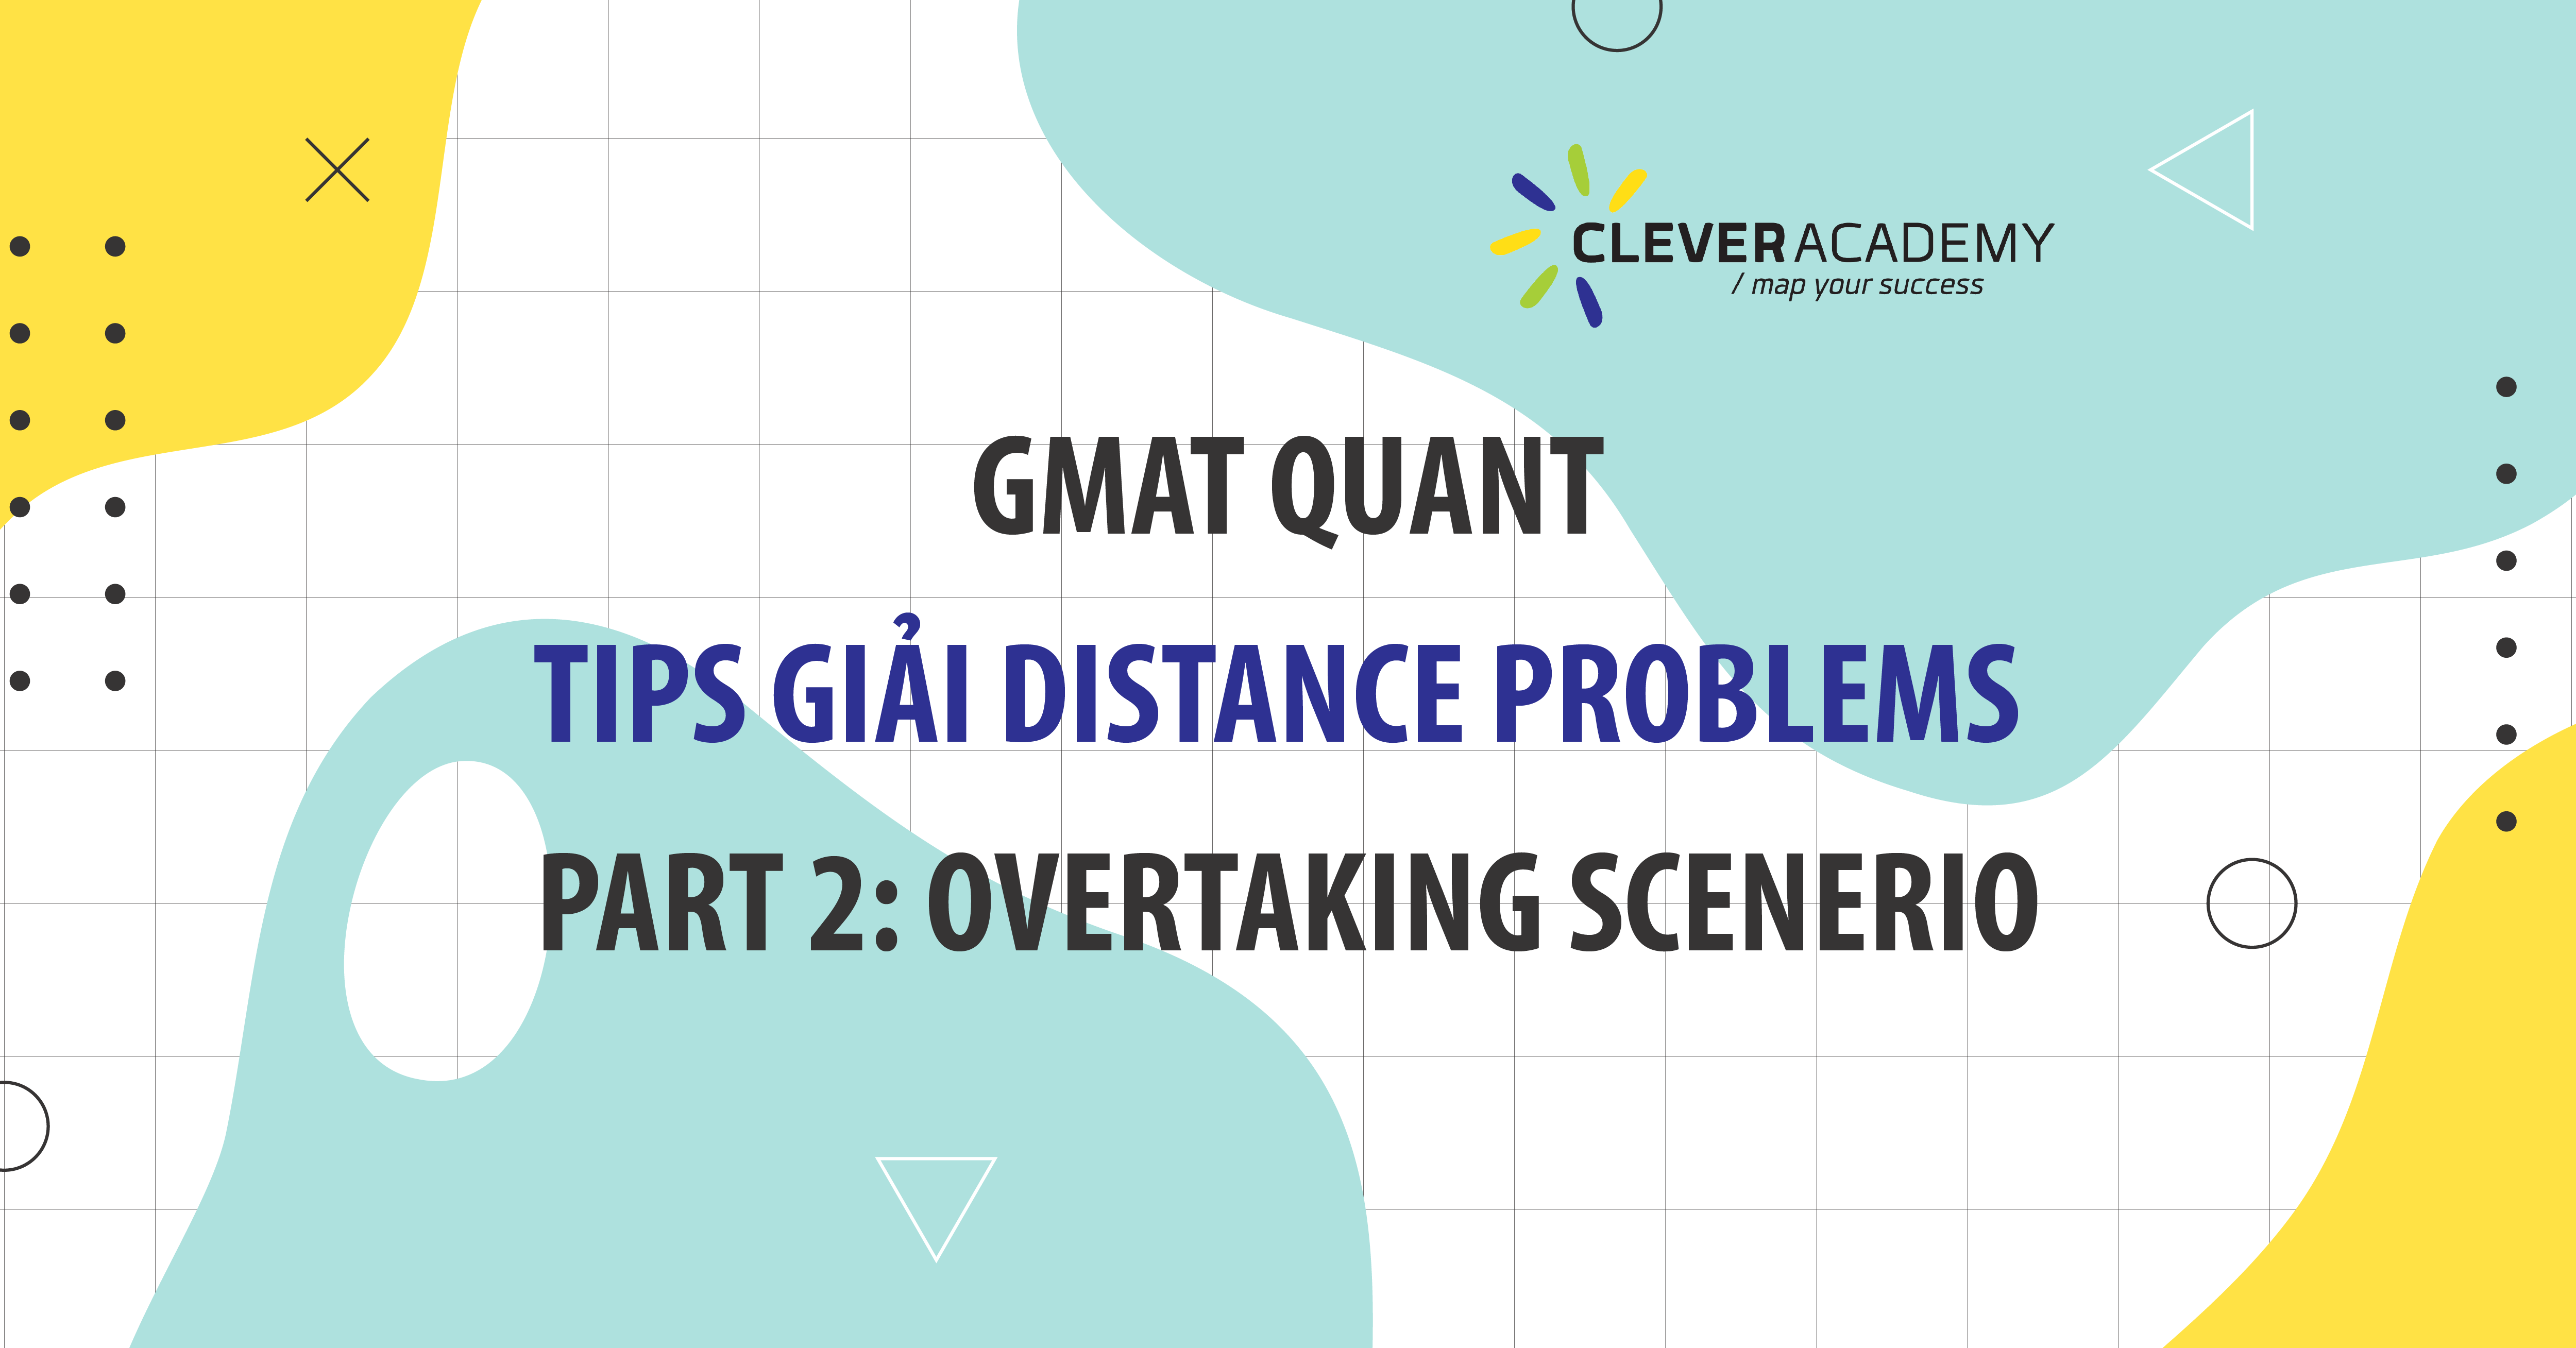 GMAT QUANT - Tips giải Distance Problems - Part 2 Overtaking Scenerio